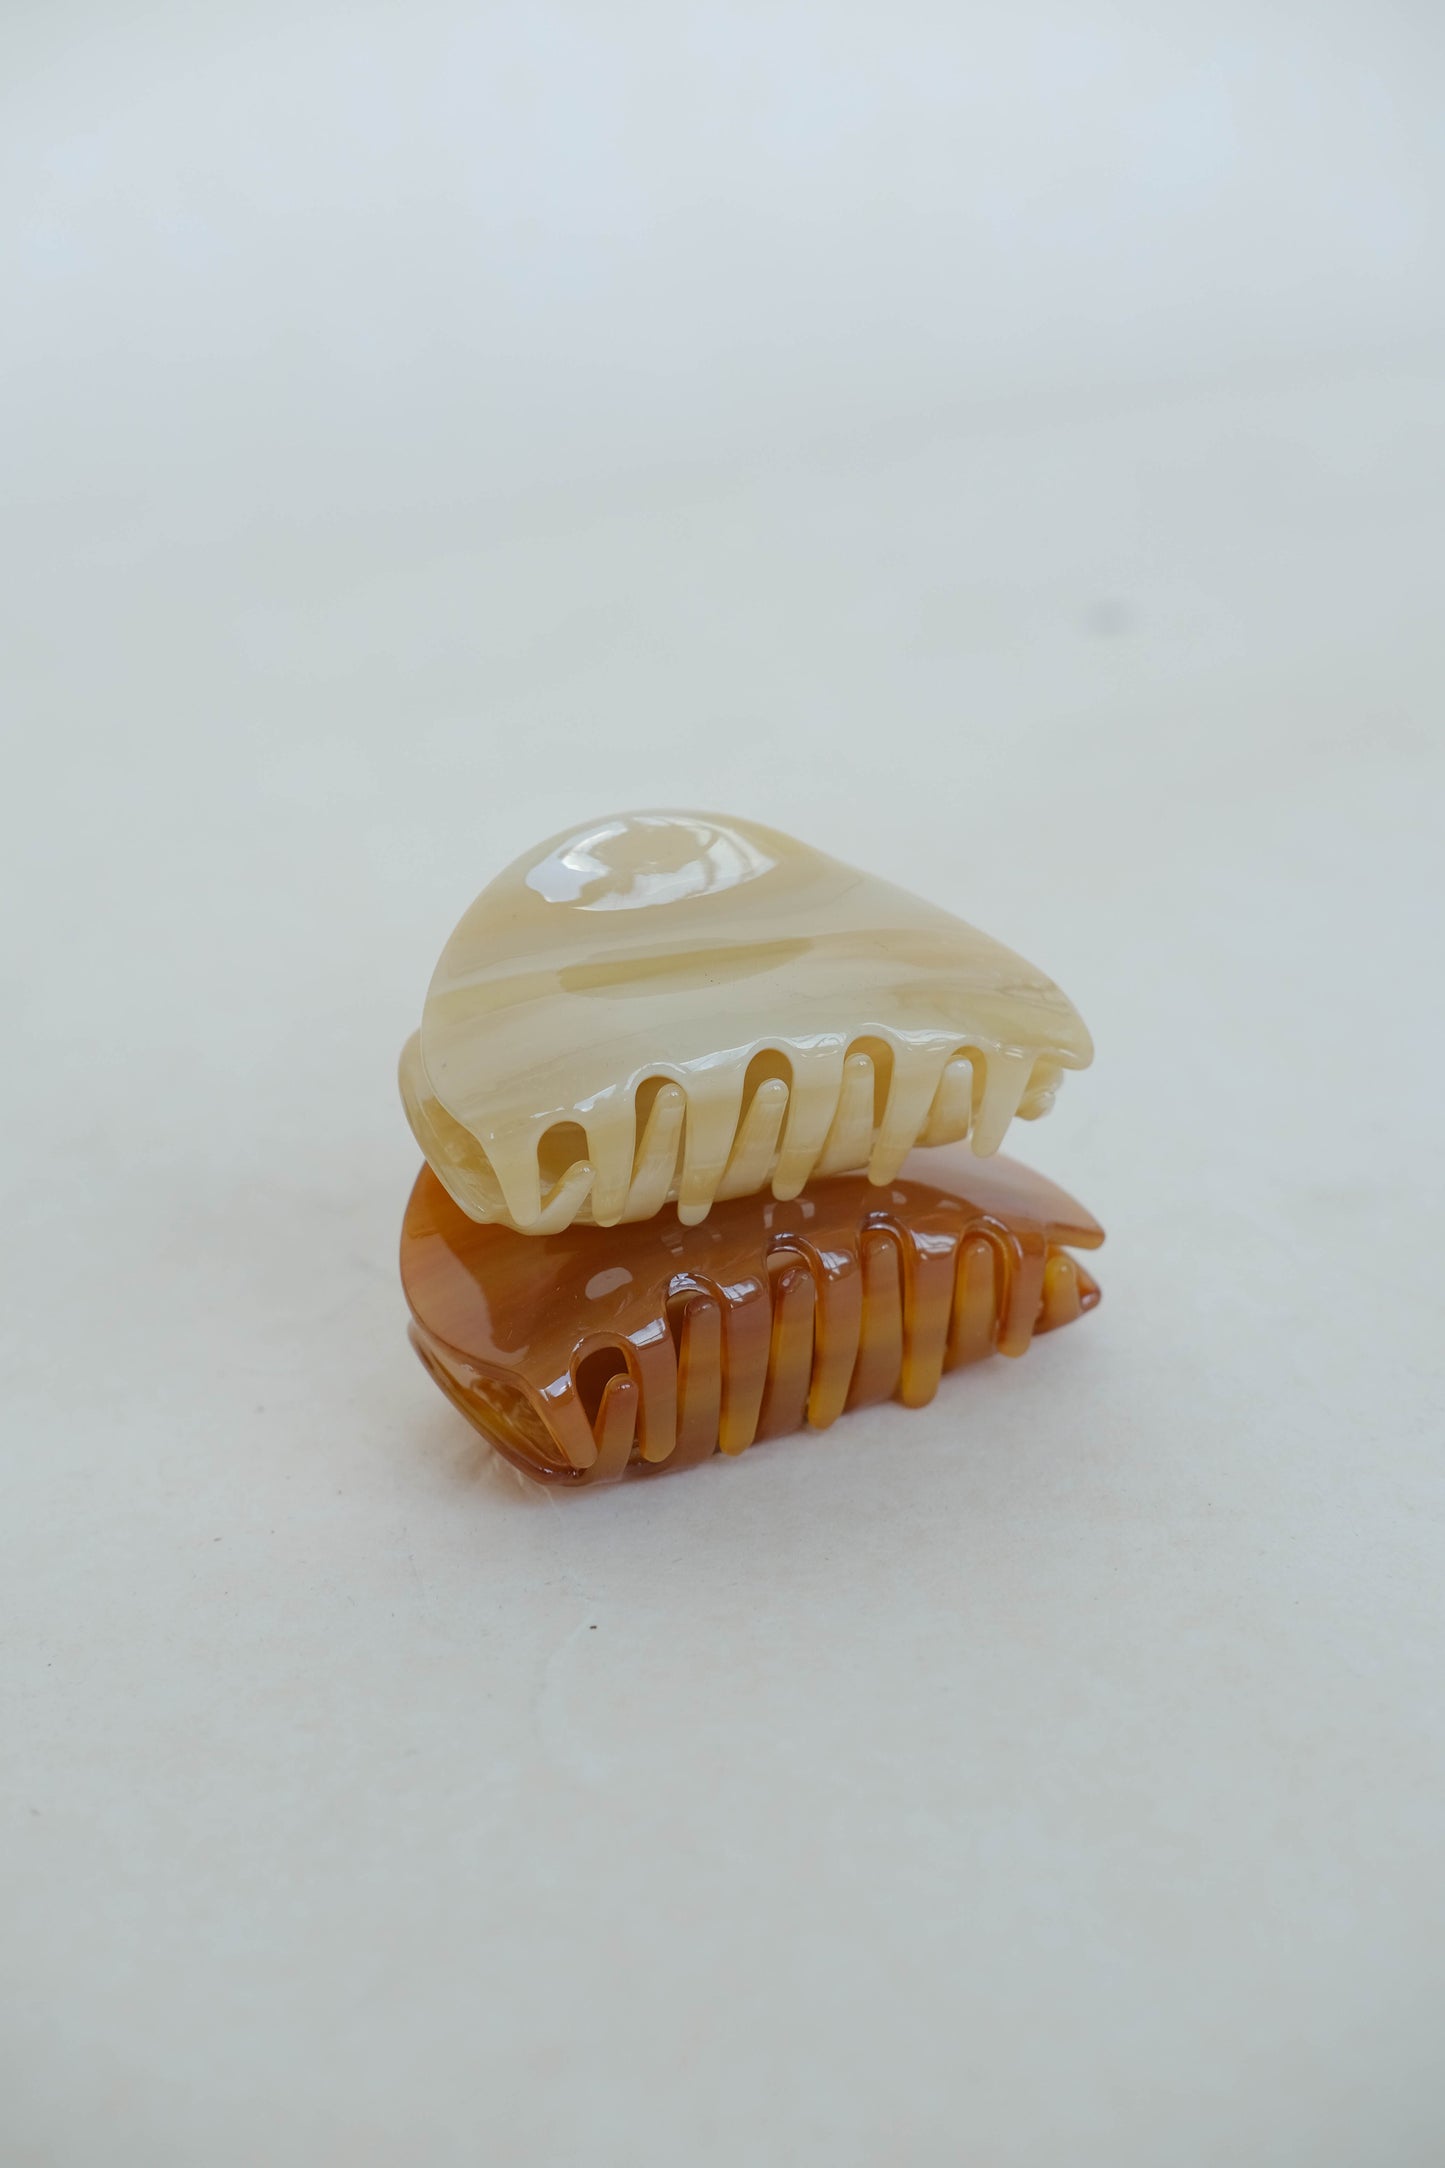 French gripper clip caramel color